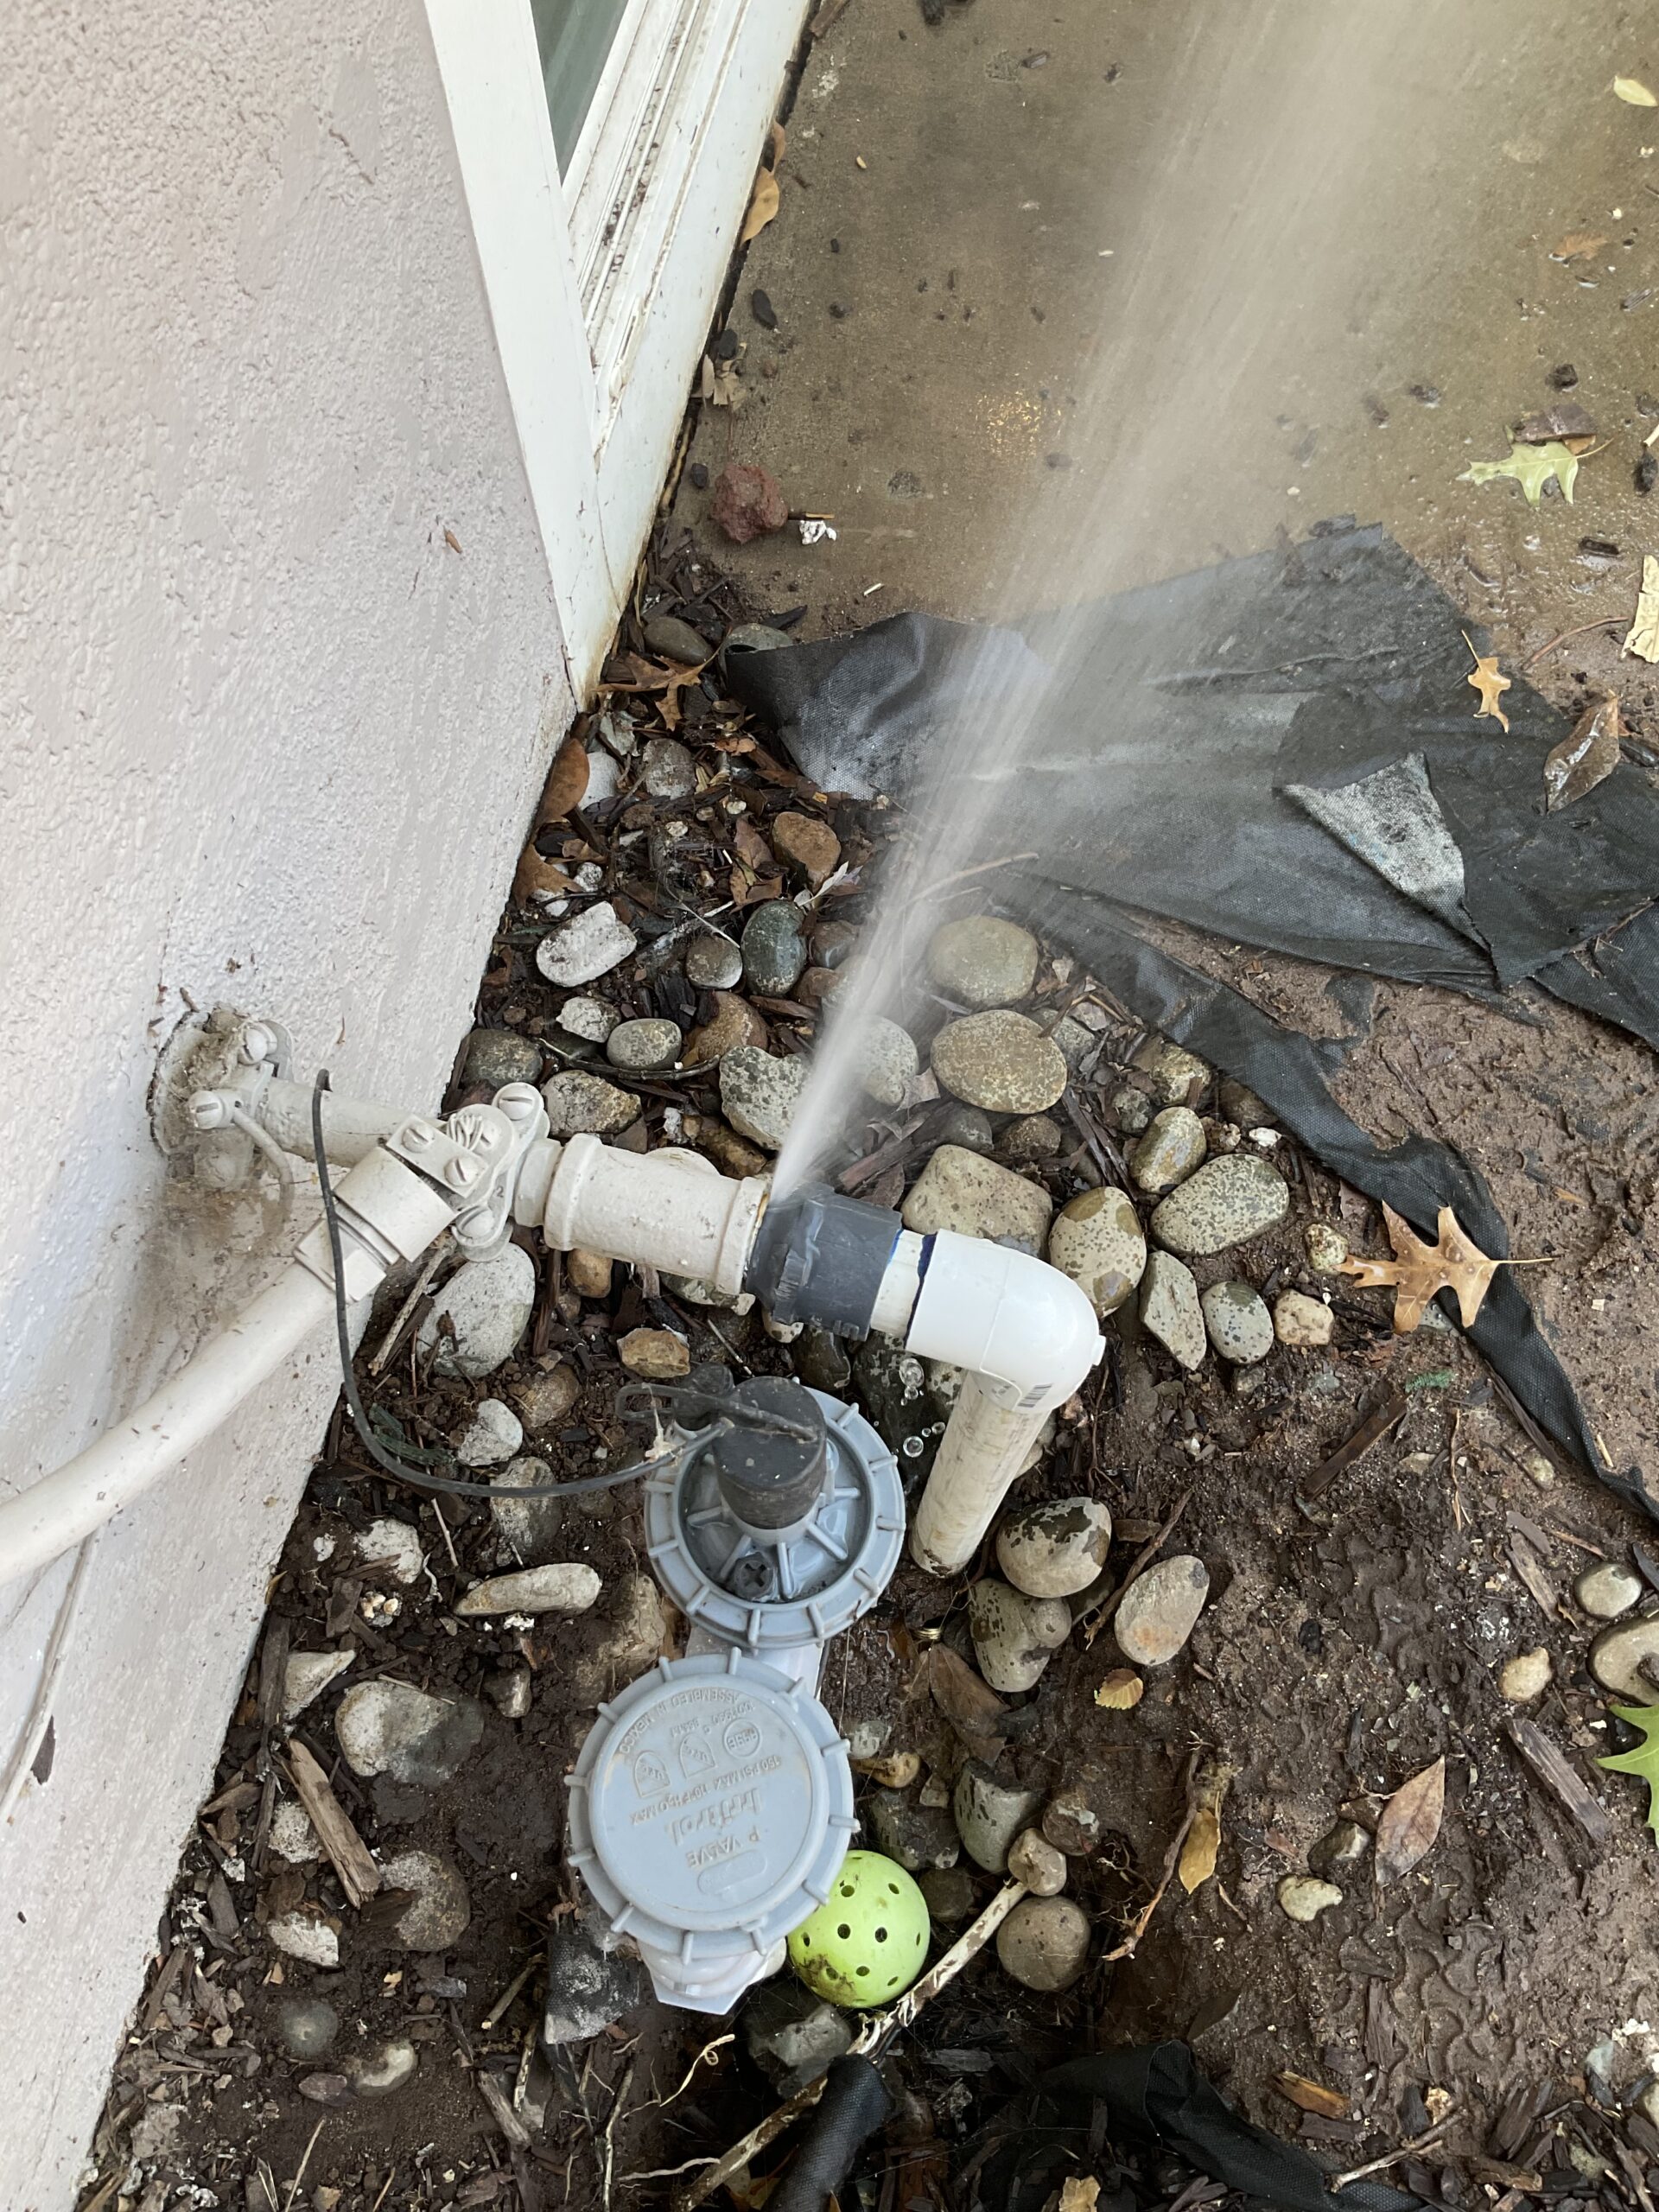 Cracked pvc fitting to galvanized pipe